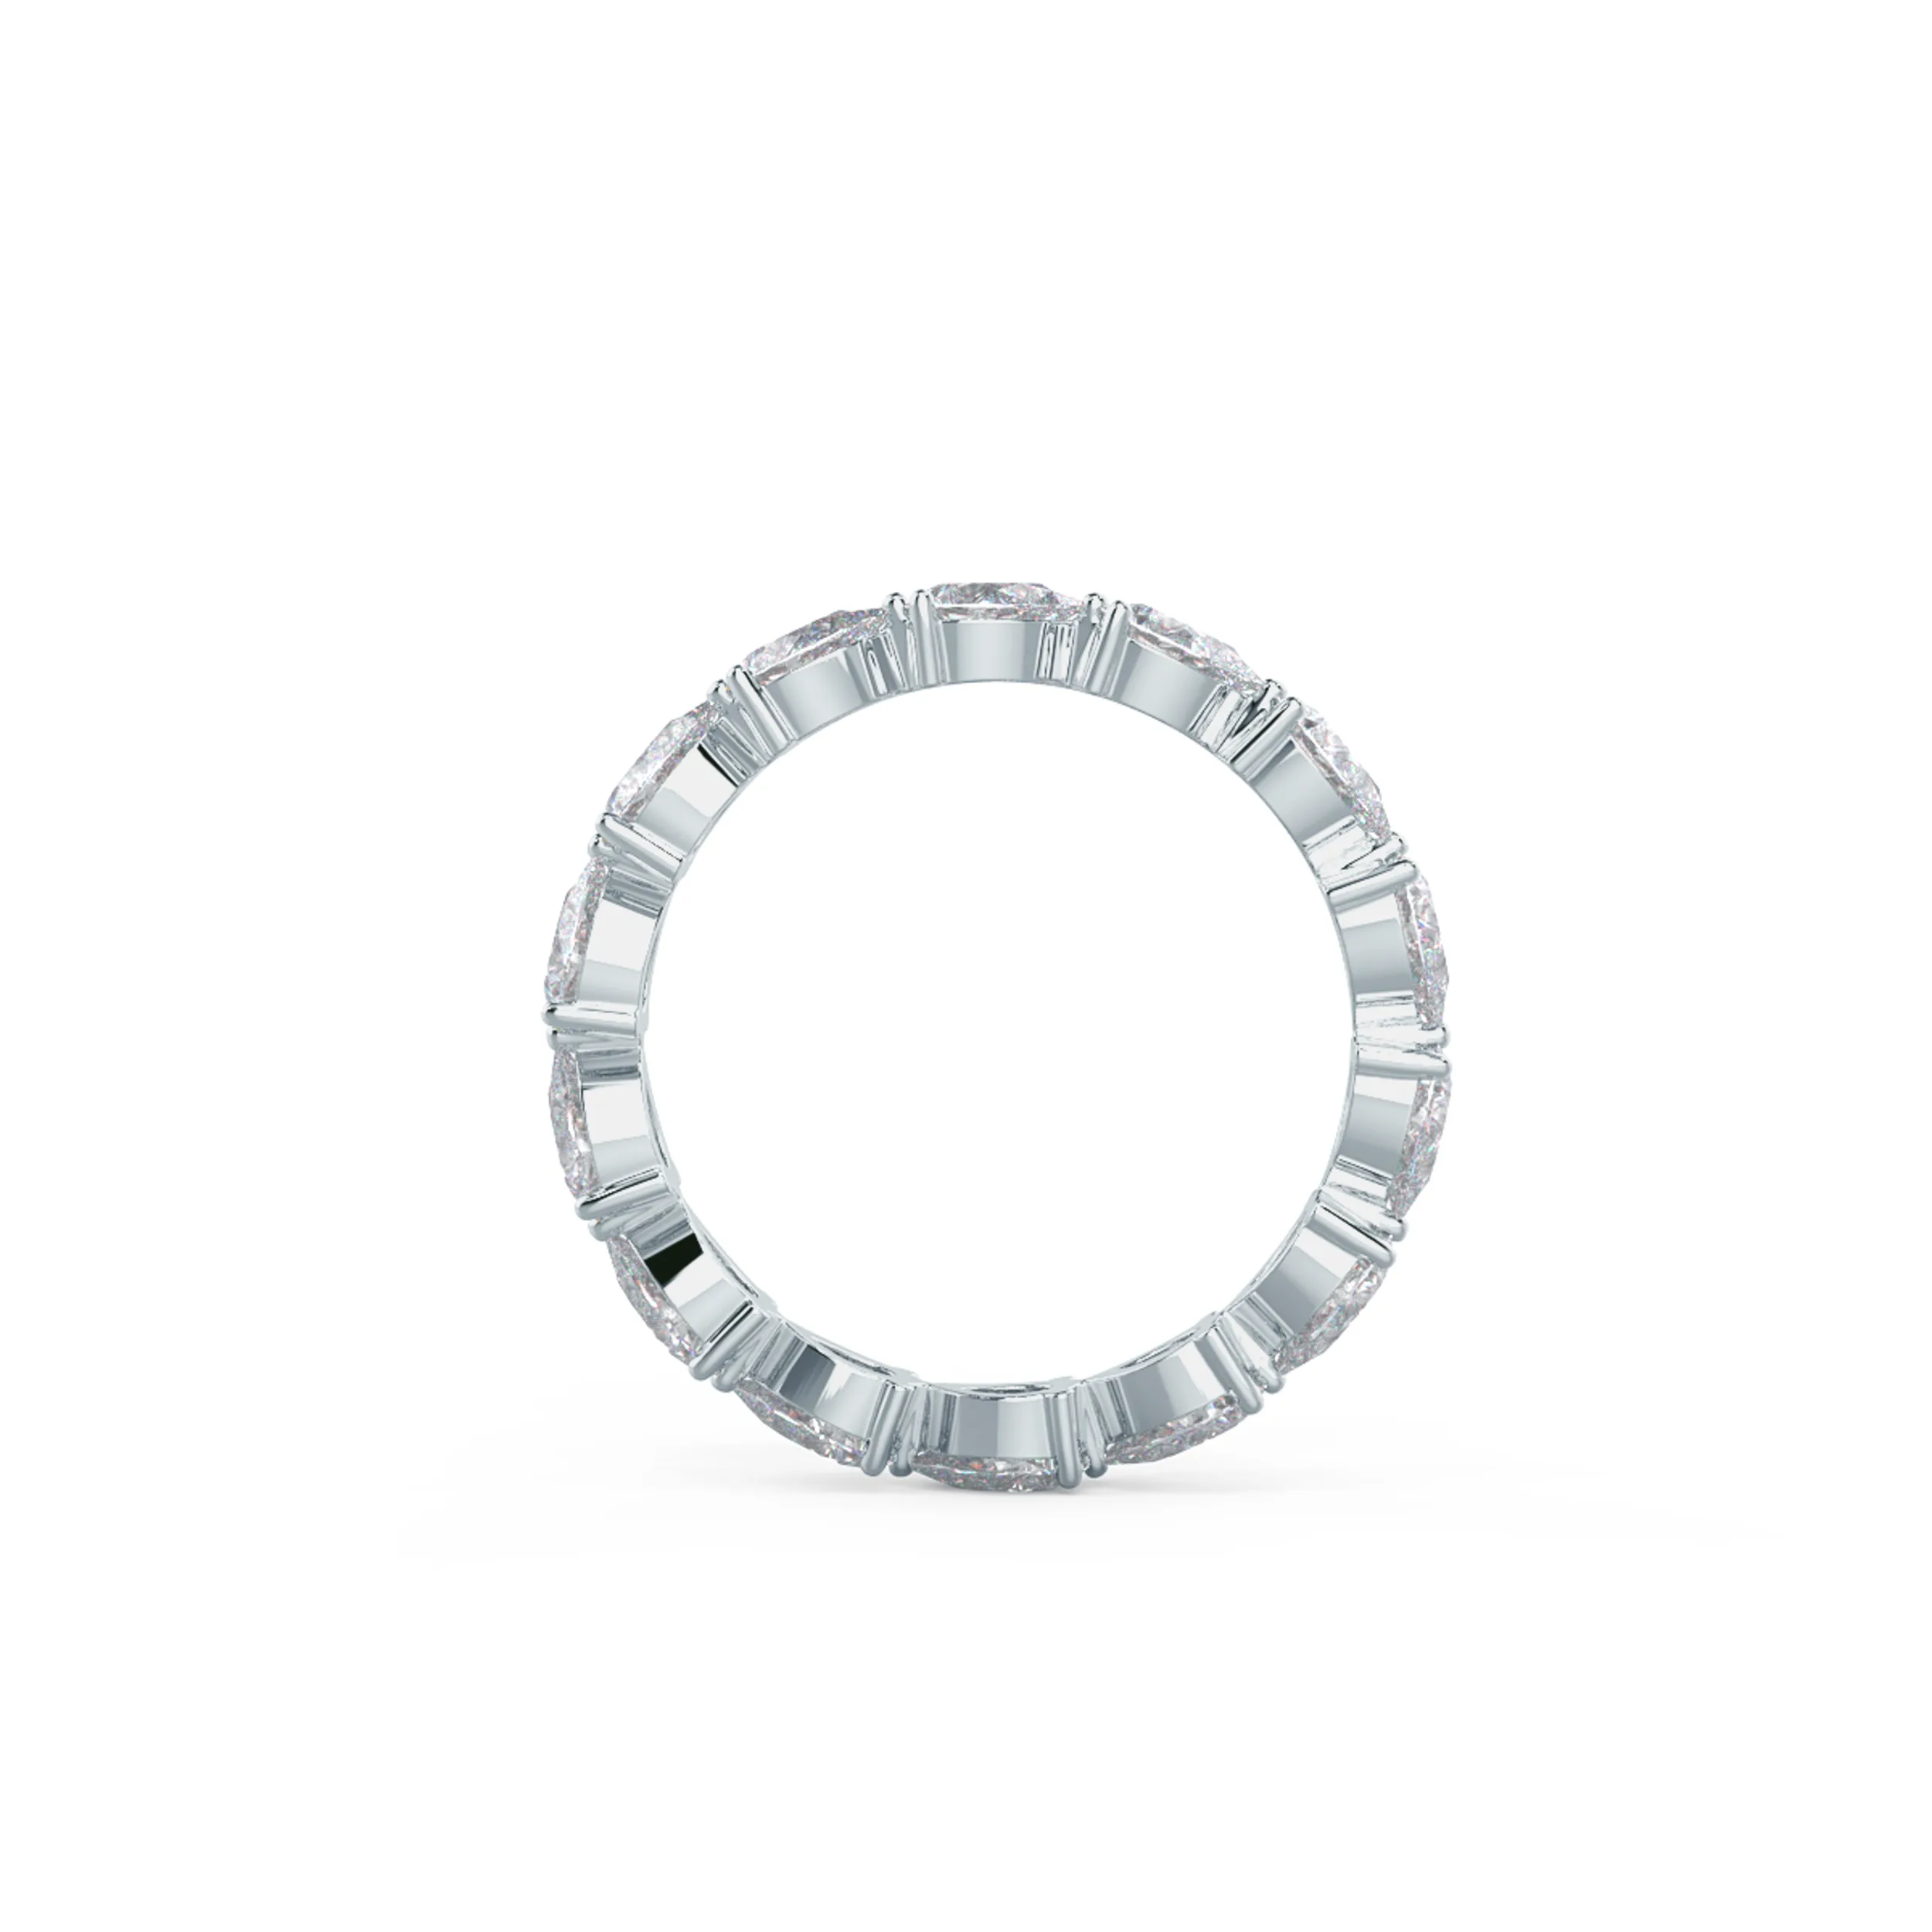 18k White Gold Pear East-West Eternity Band featuring High Quality 2.0 ctw Diamonds (Profile View)